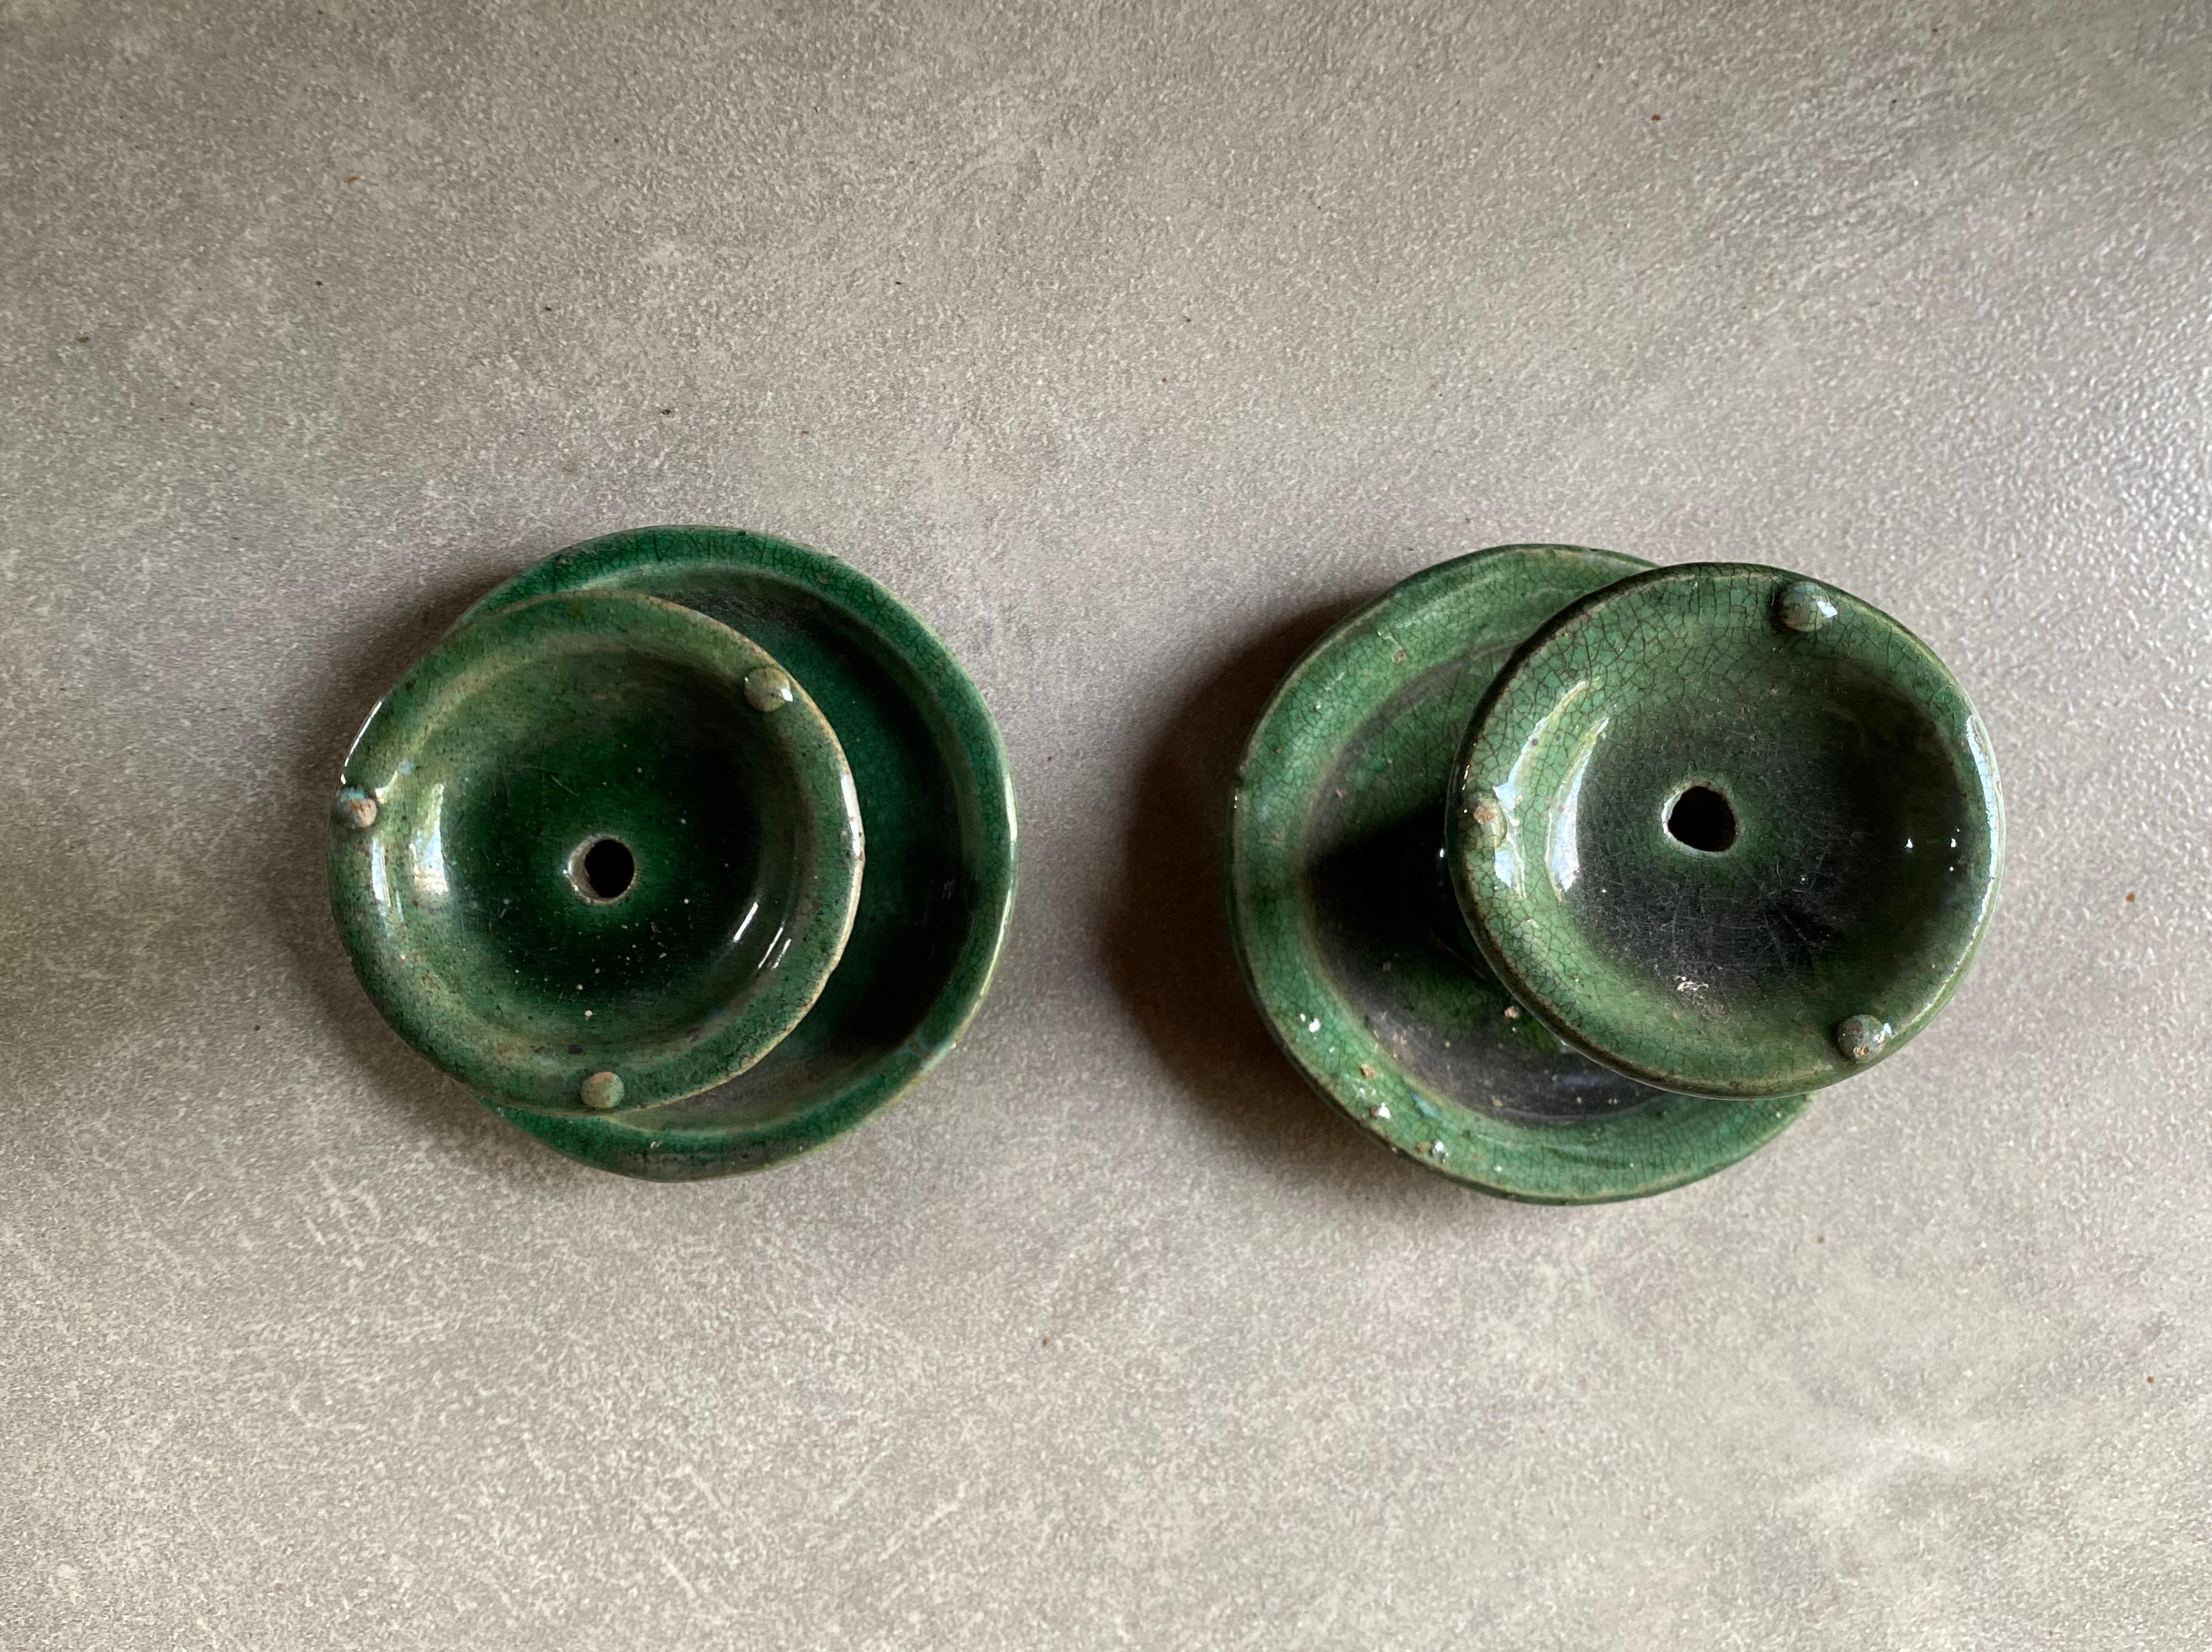 This set of Shiwan ware oil lamps from the early 20th century features the distinctive green glaze. Shiwan ware is a style of Chinese pottery from the Shiwanzhen district near Guangdong, China. This pair is small in size. 

Measures: Diameter 10cm